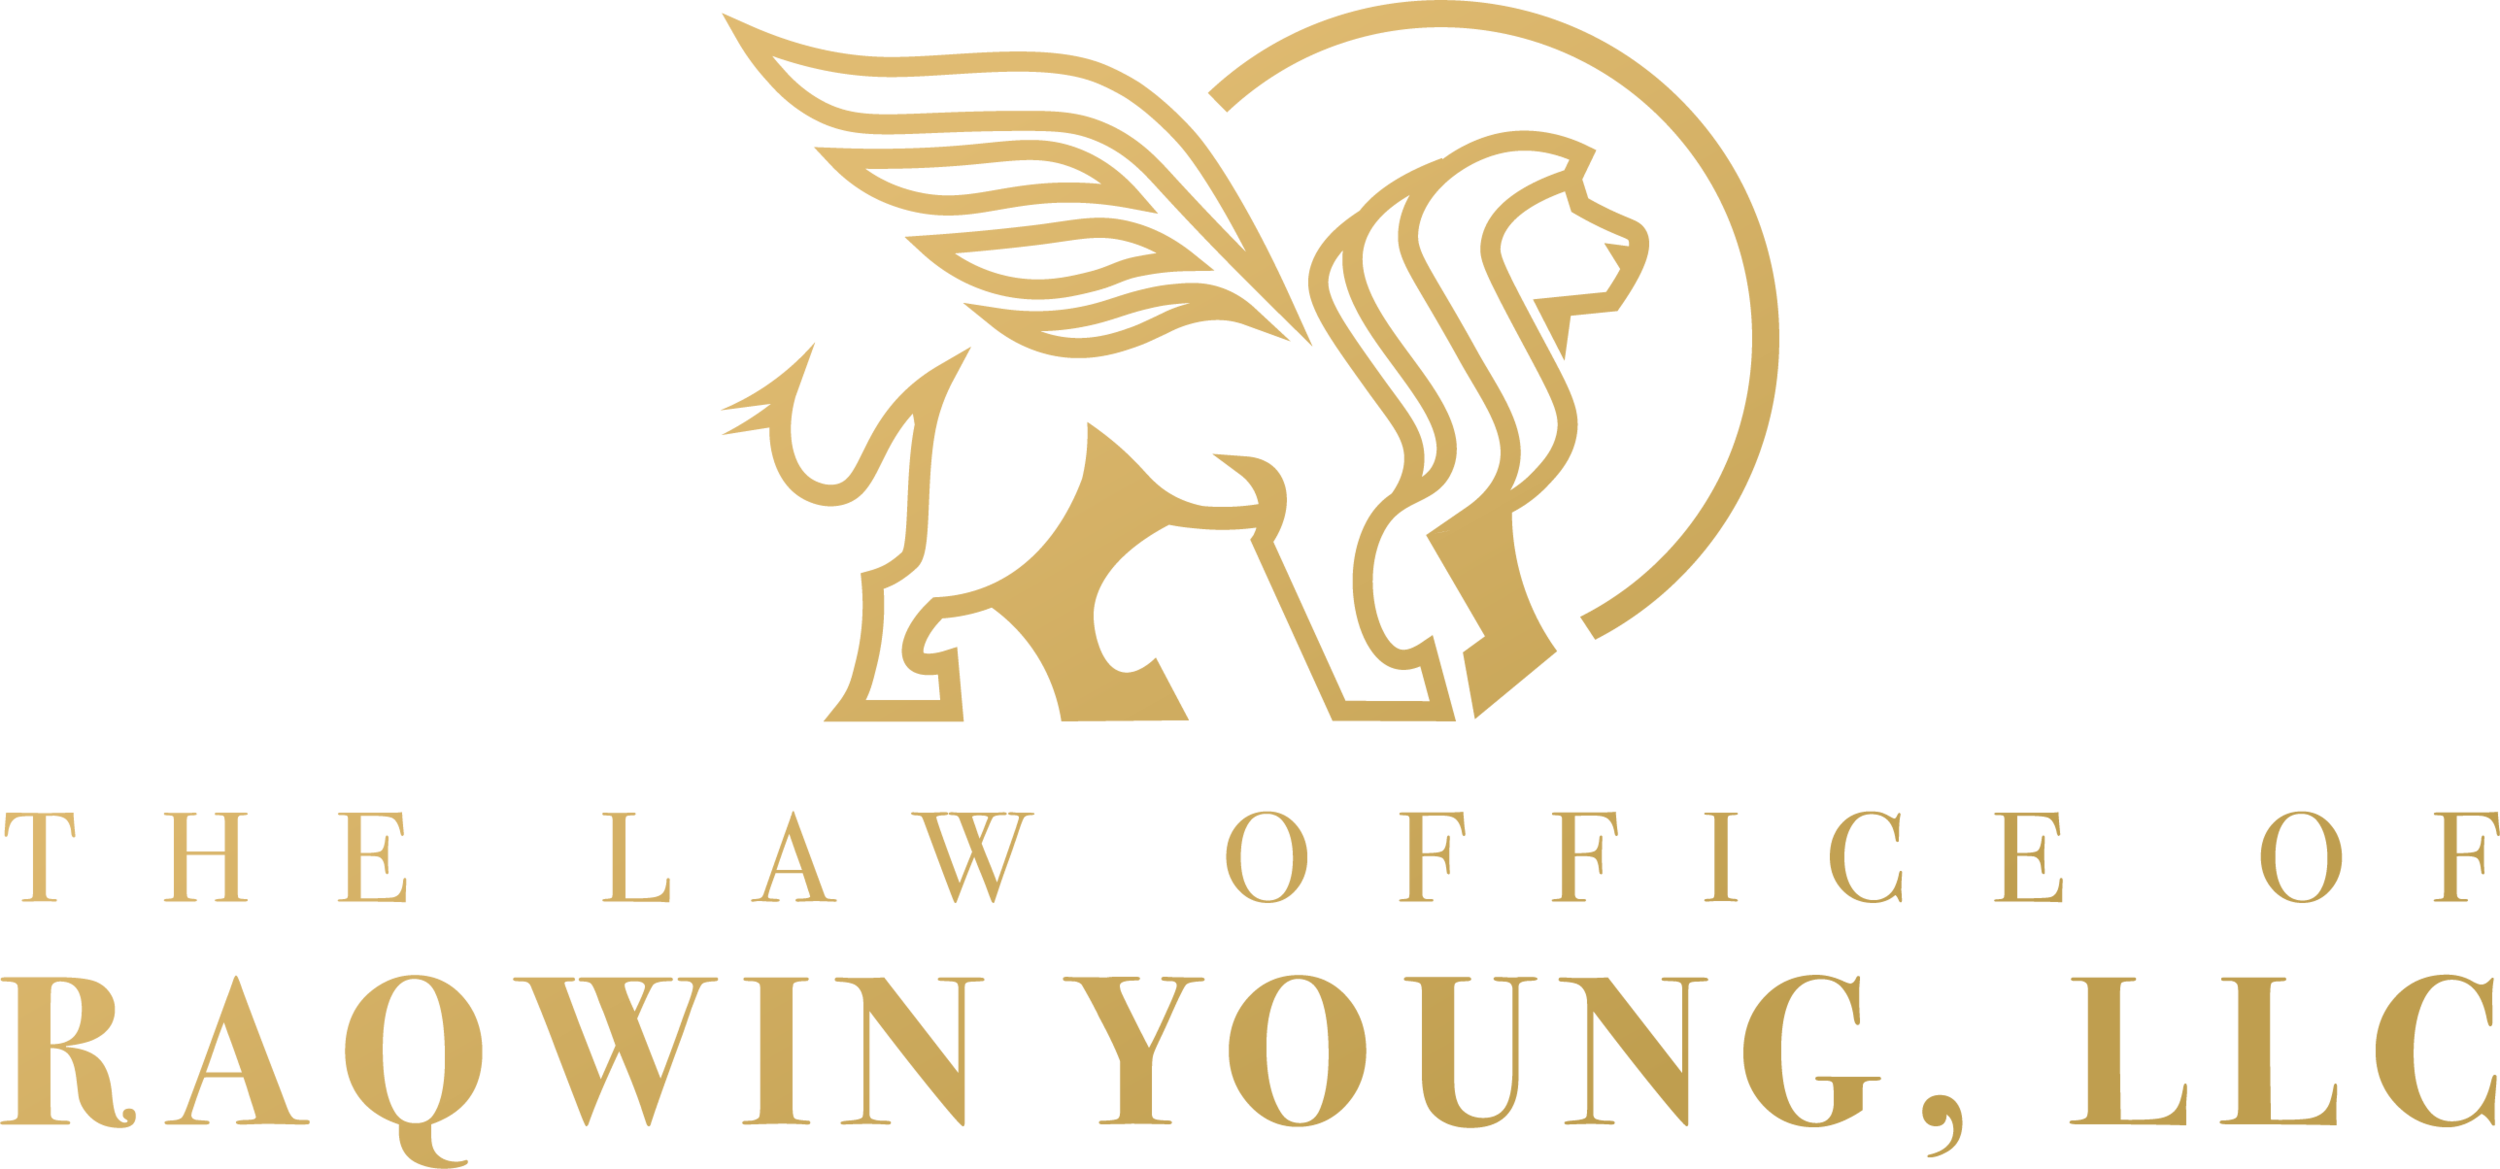 The Law Office of RaQwin Young, LLC